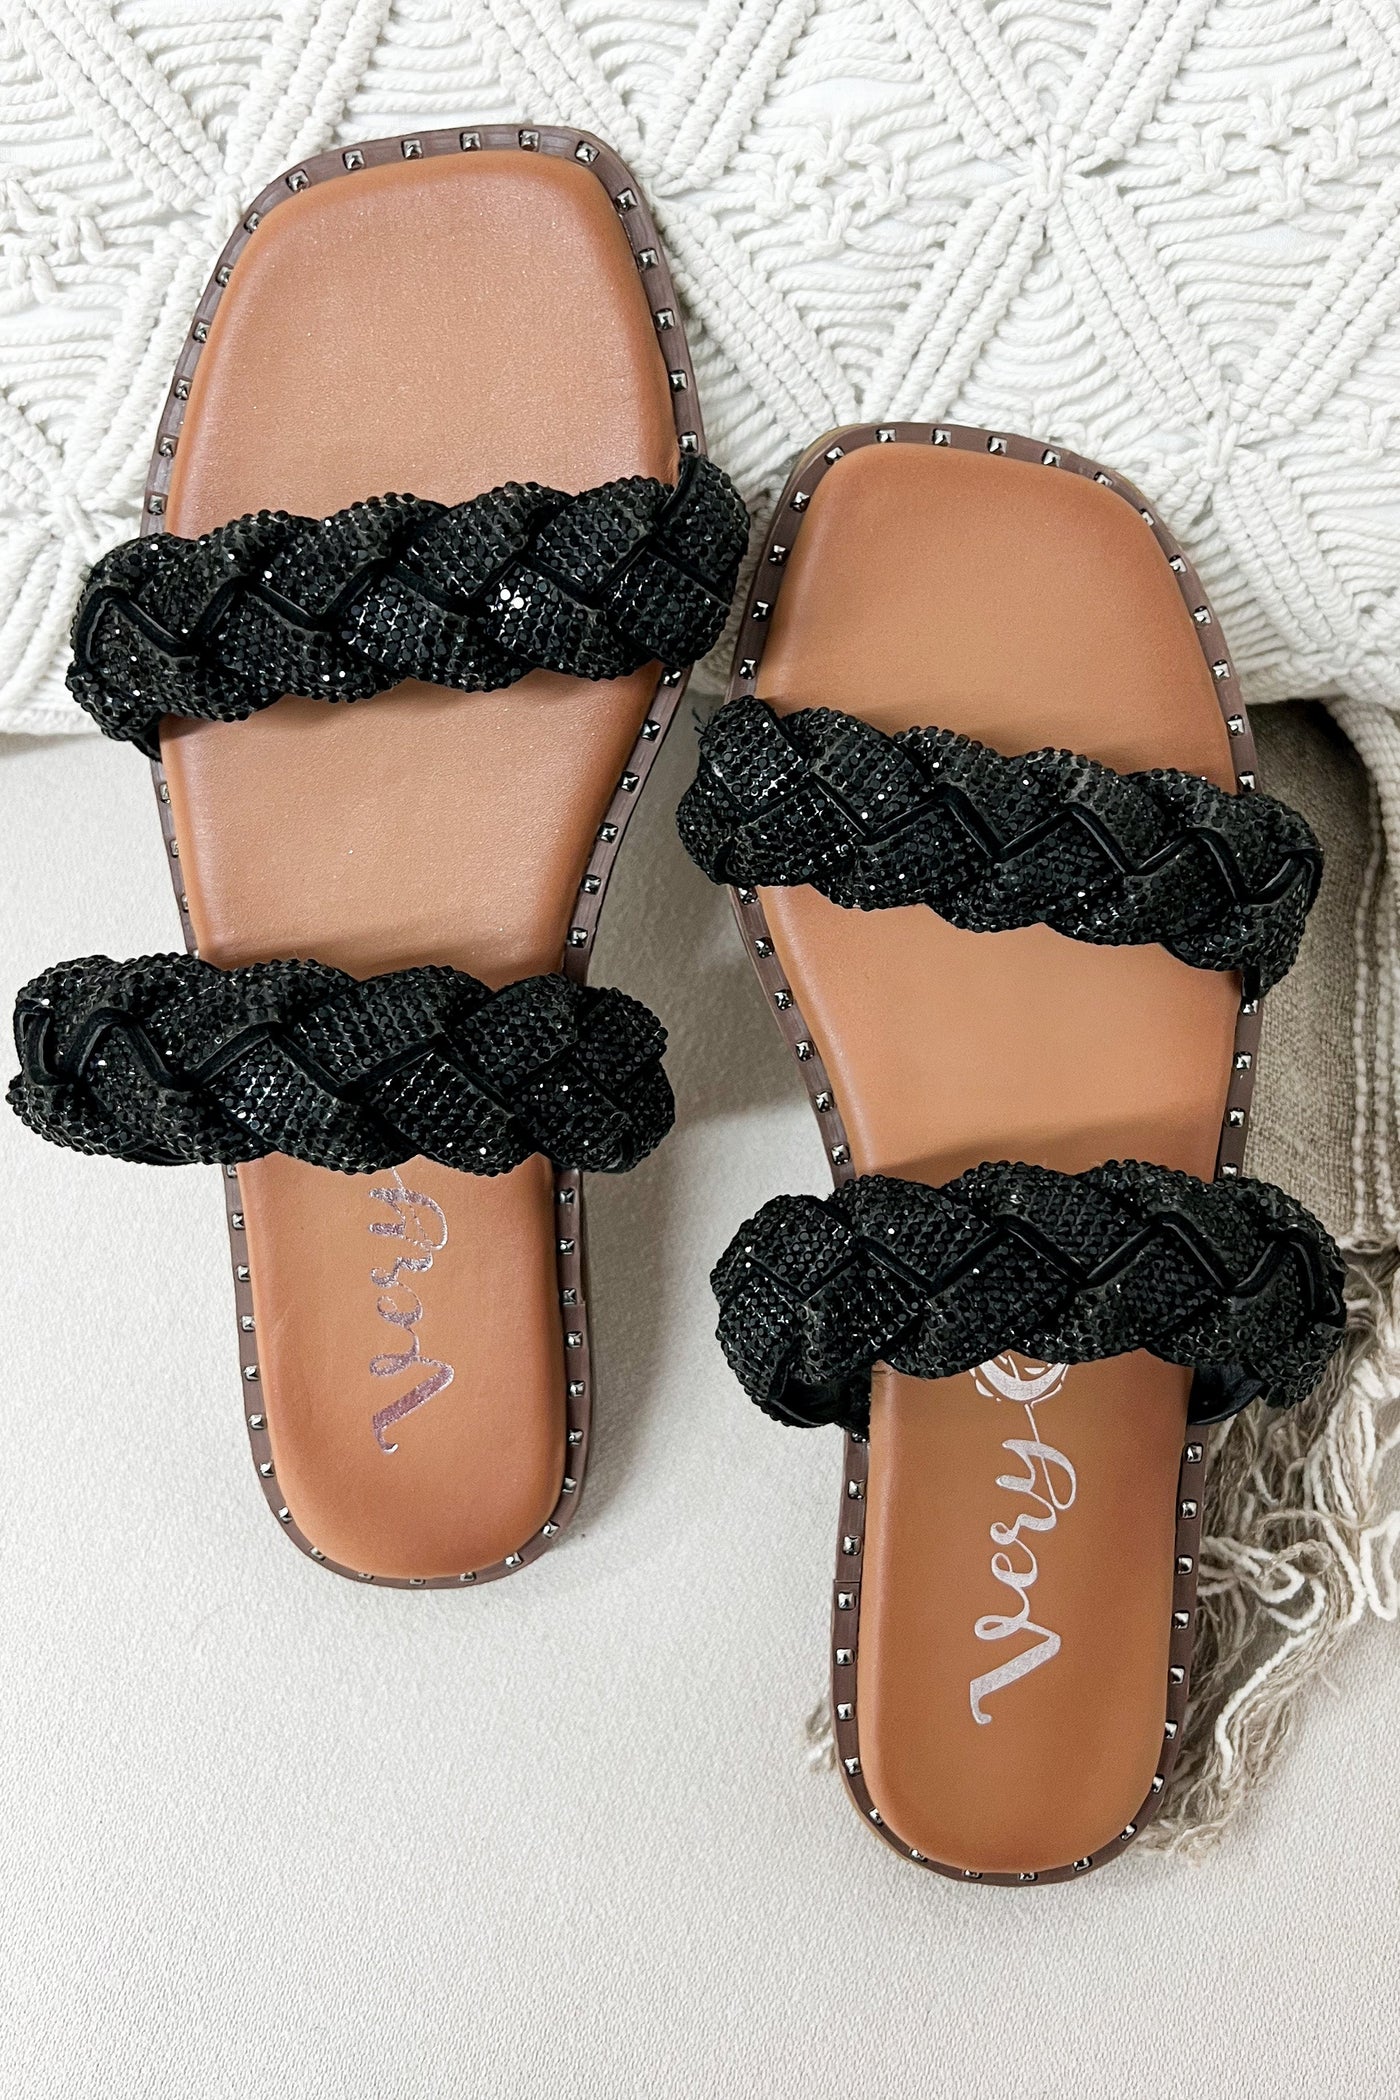 Very G Twisty Sandals (Black) - Happily Ever Aften